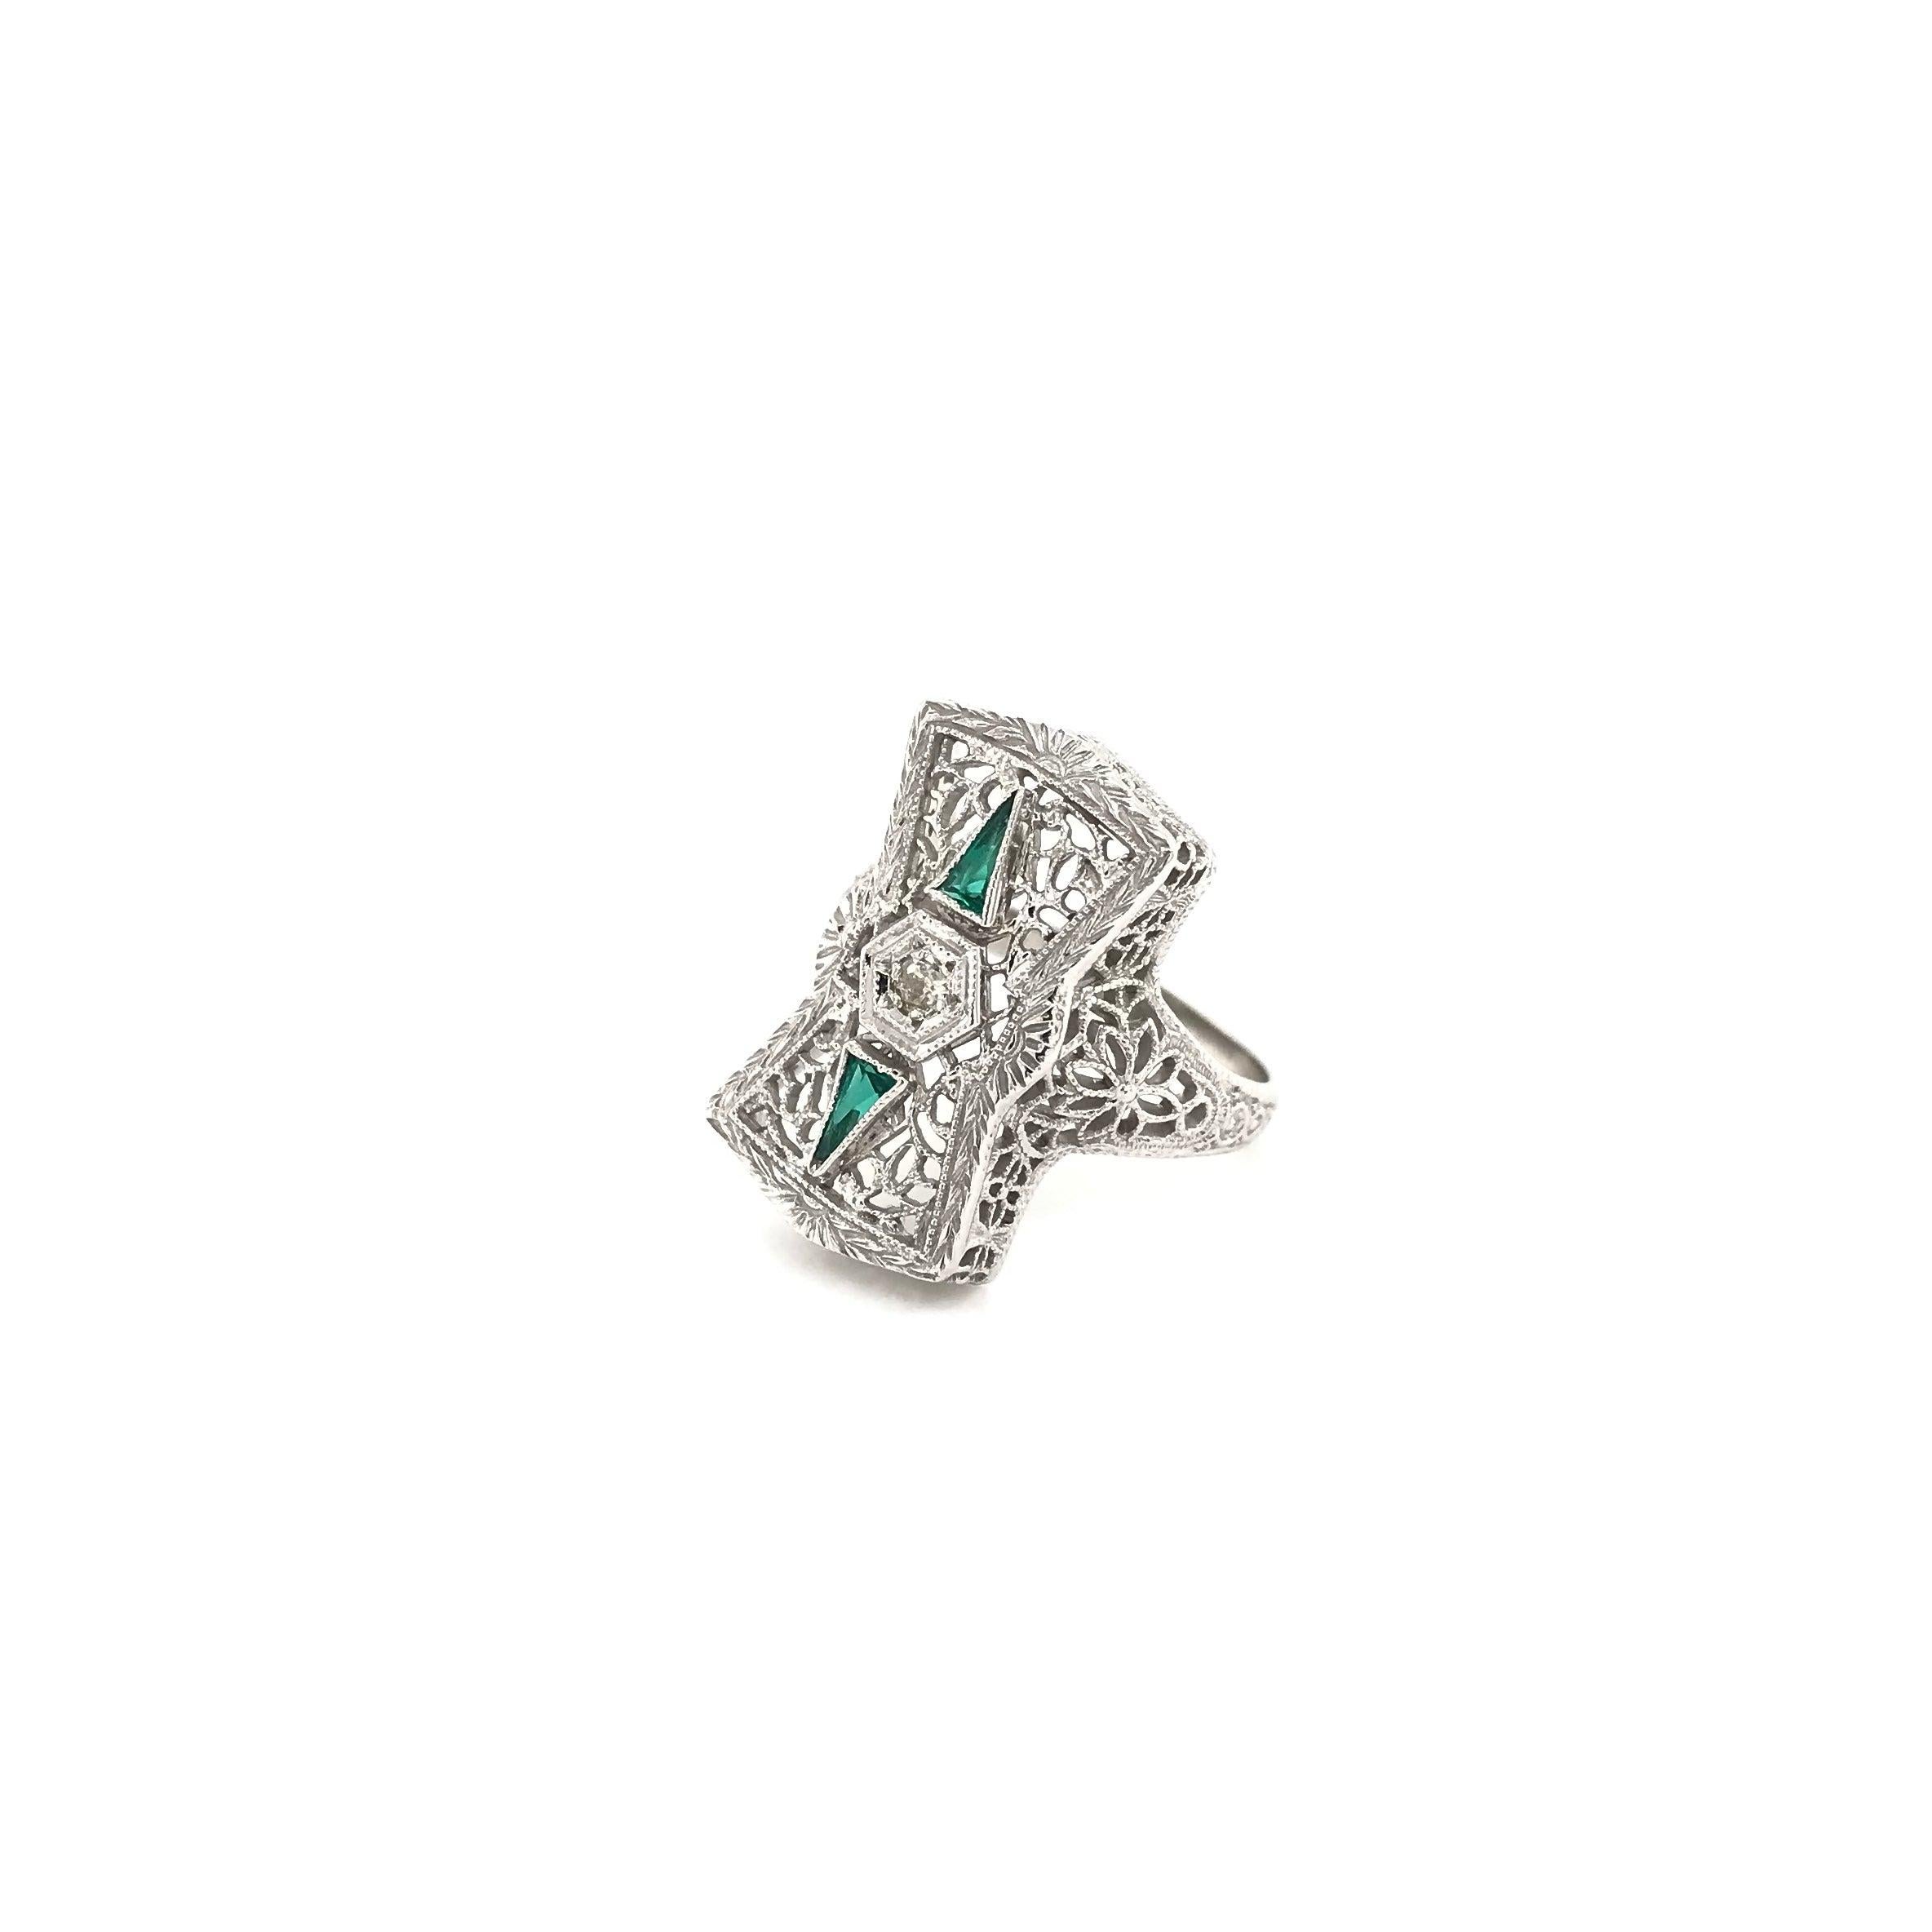 This exceptional antique piece was handcrafted sometime during the Art Deco design period (1920-1940). The 14K white gold setting features extensive exceptionally fine floral filigree, custom cut emerald accents, incredible milgrain work, and one